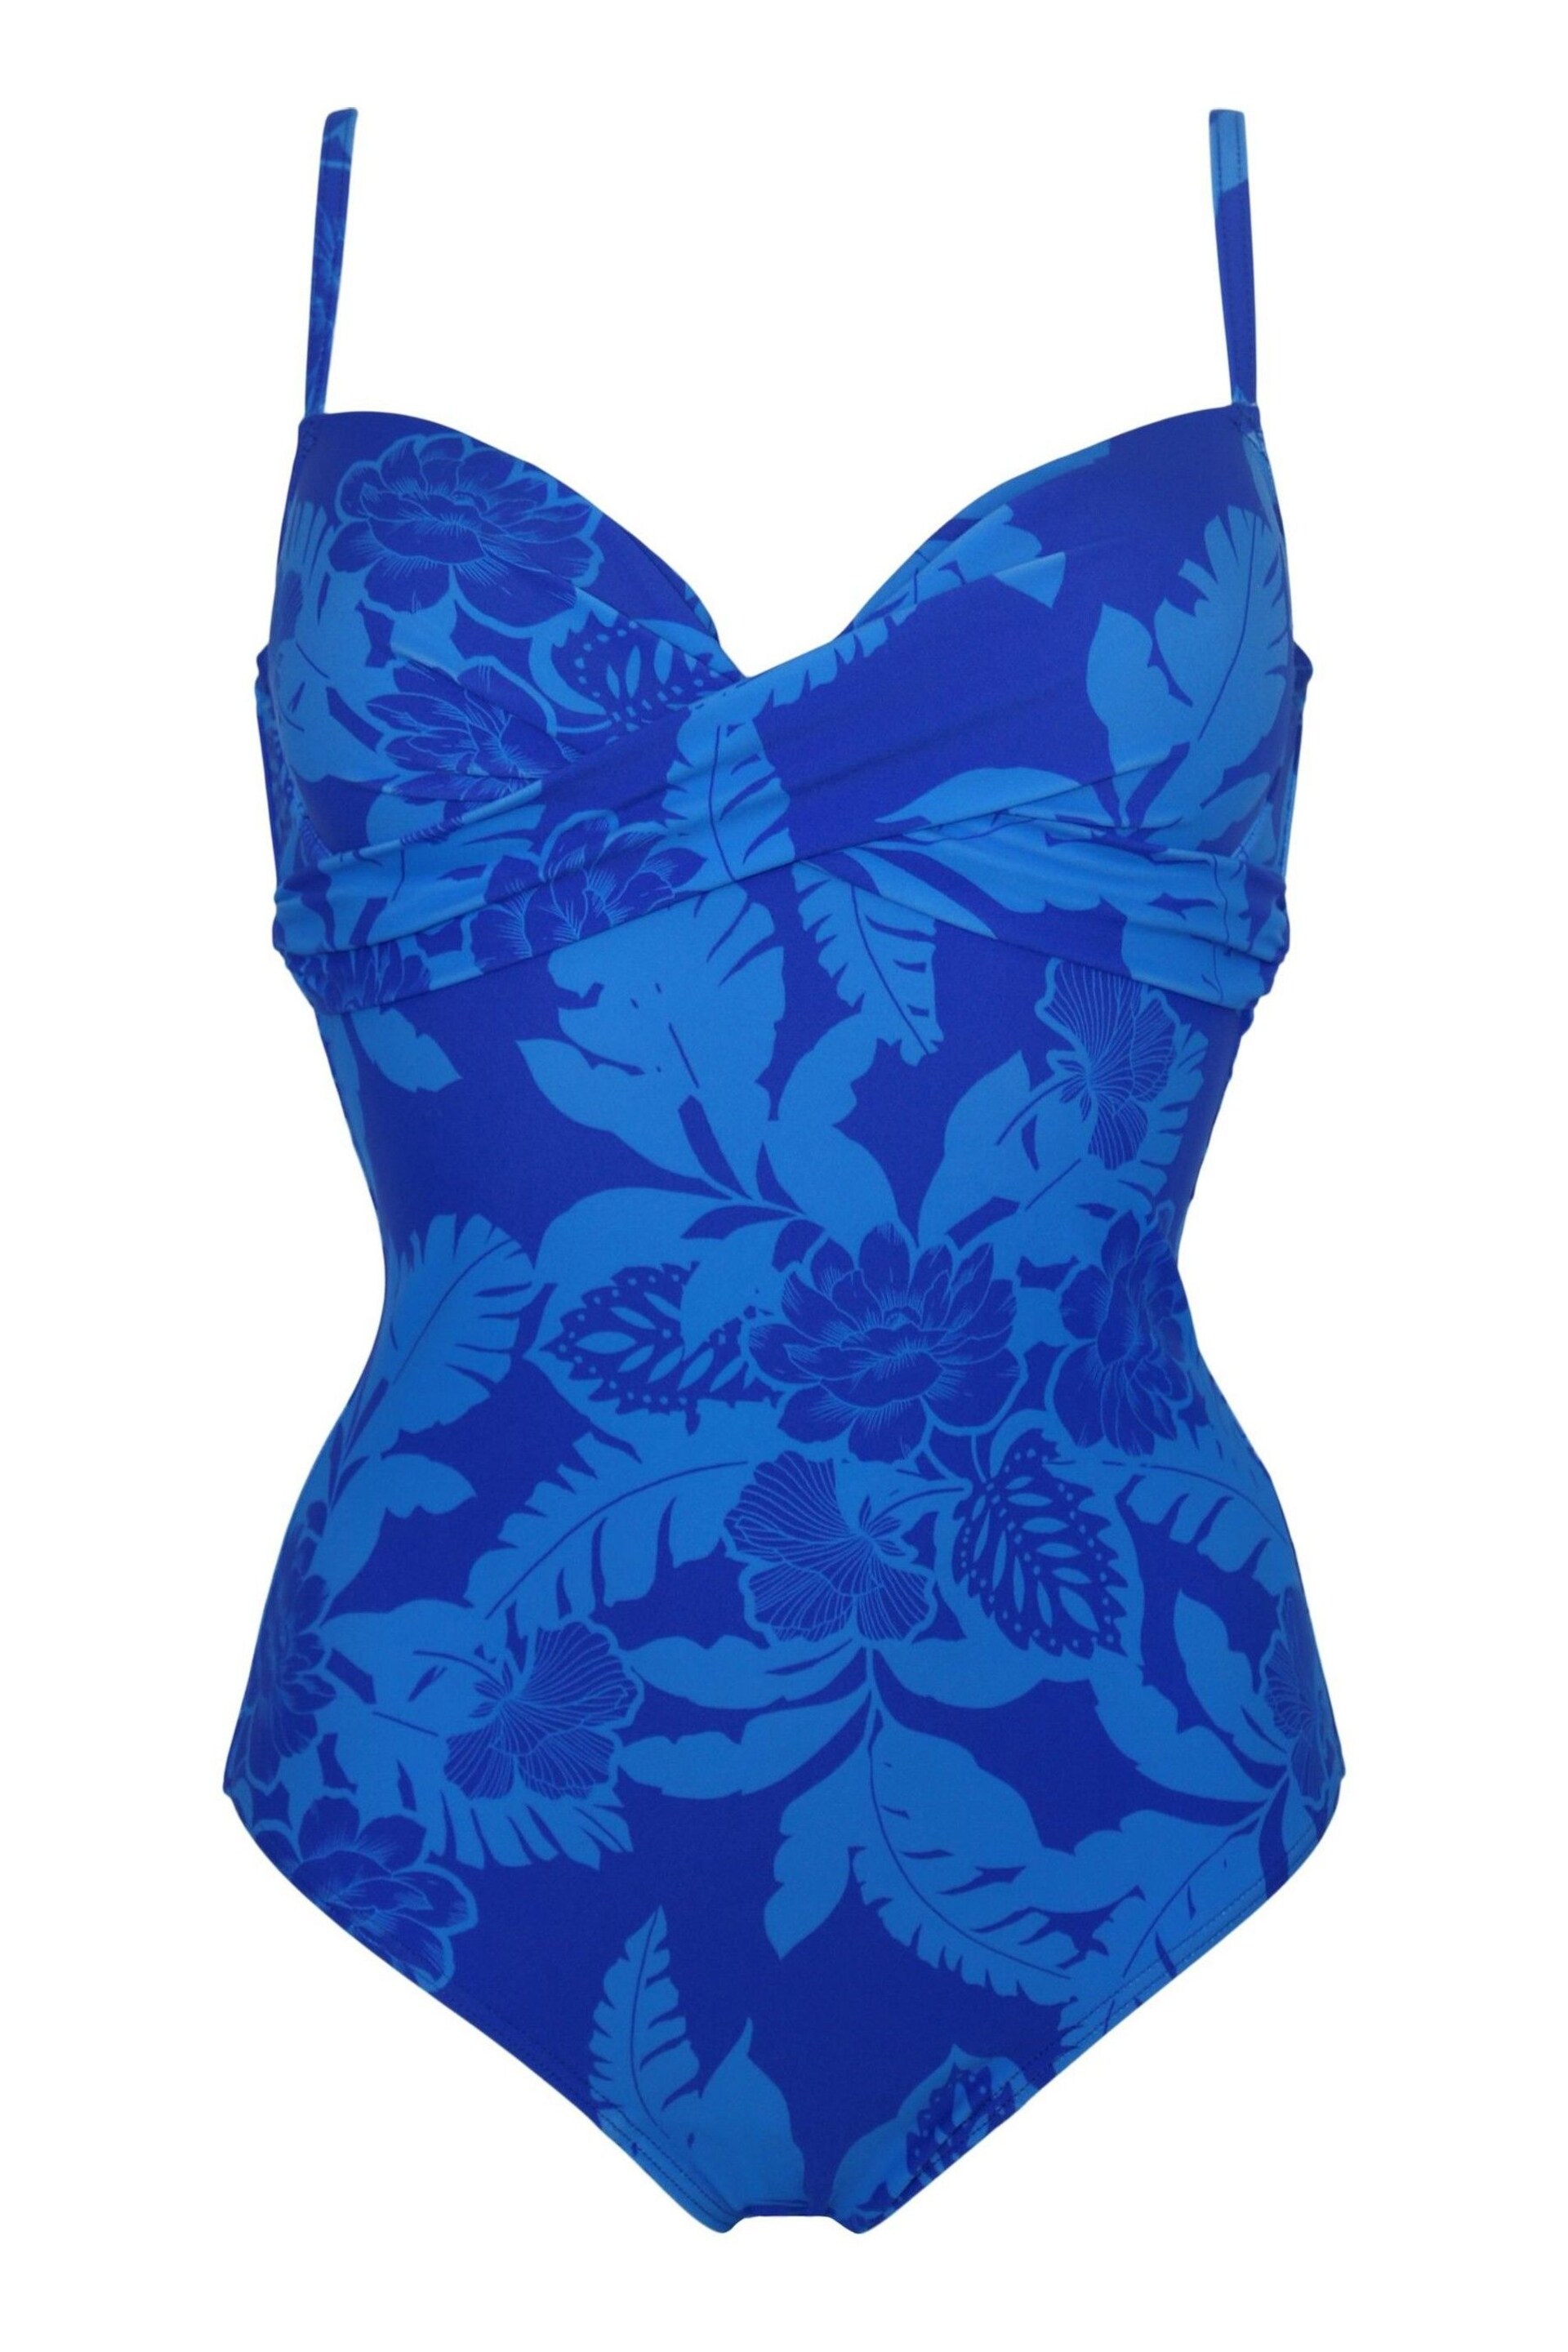 Pour Moi Blue Tropical Lightly Padded Underwired Twist Front Control Swimsuit - Image 3 of 4